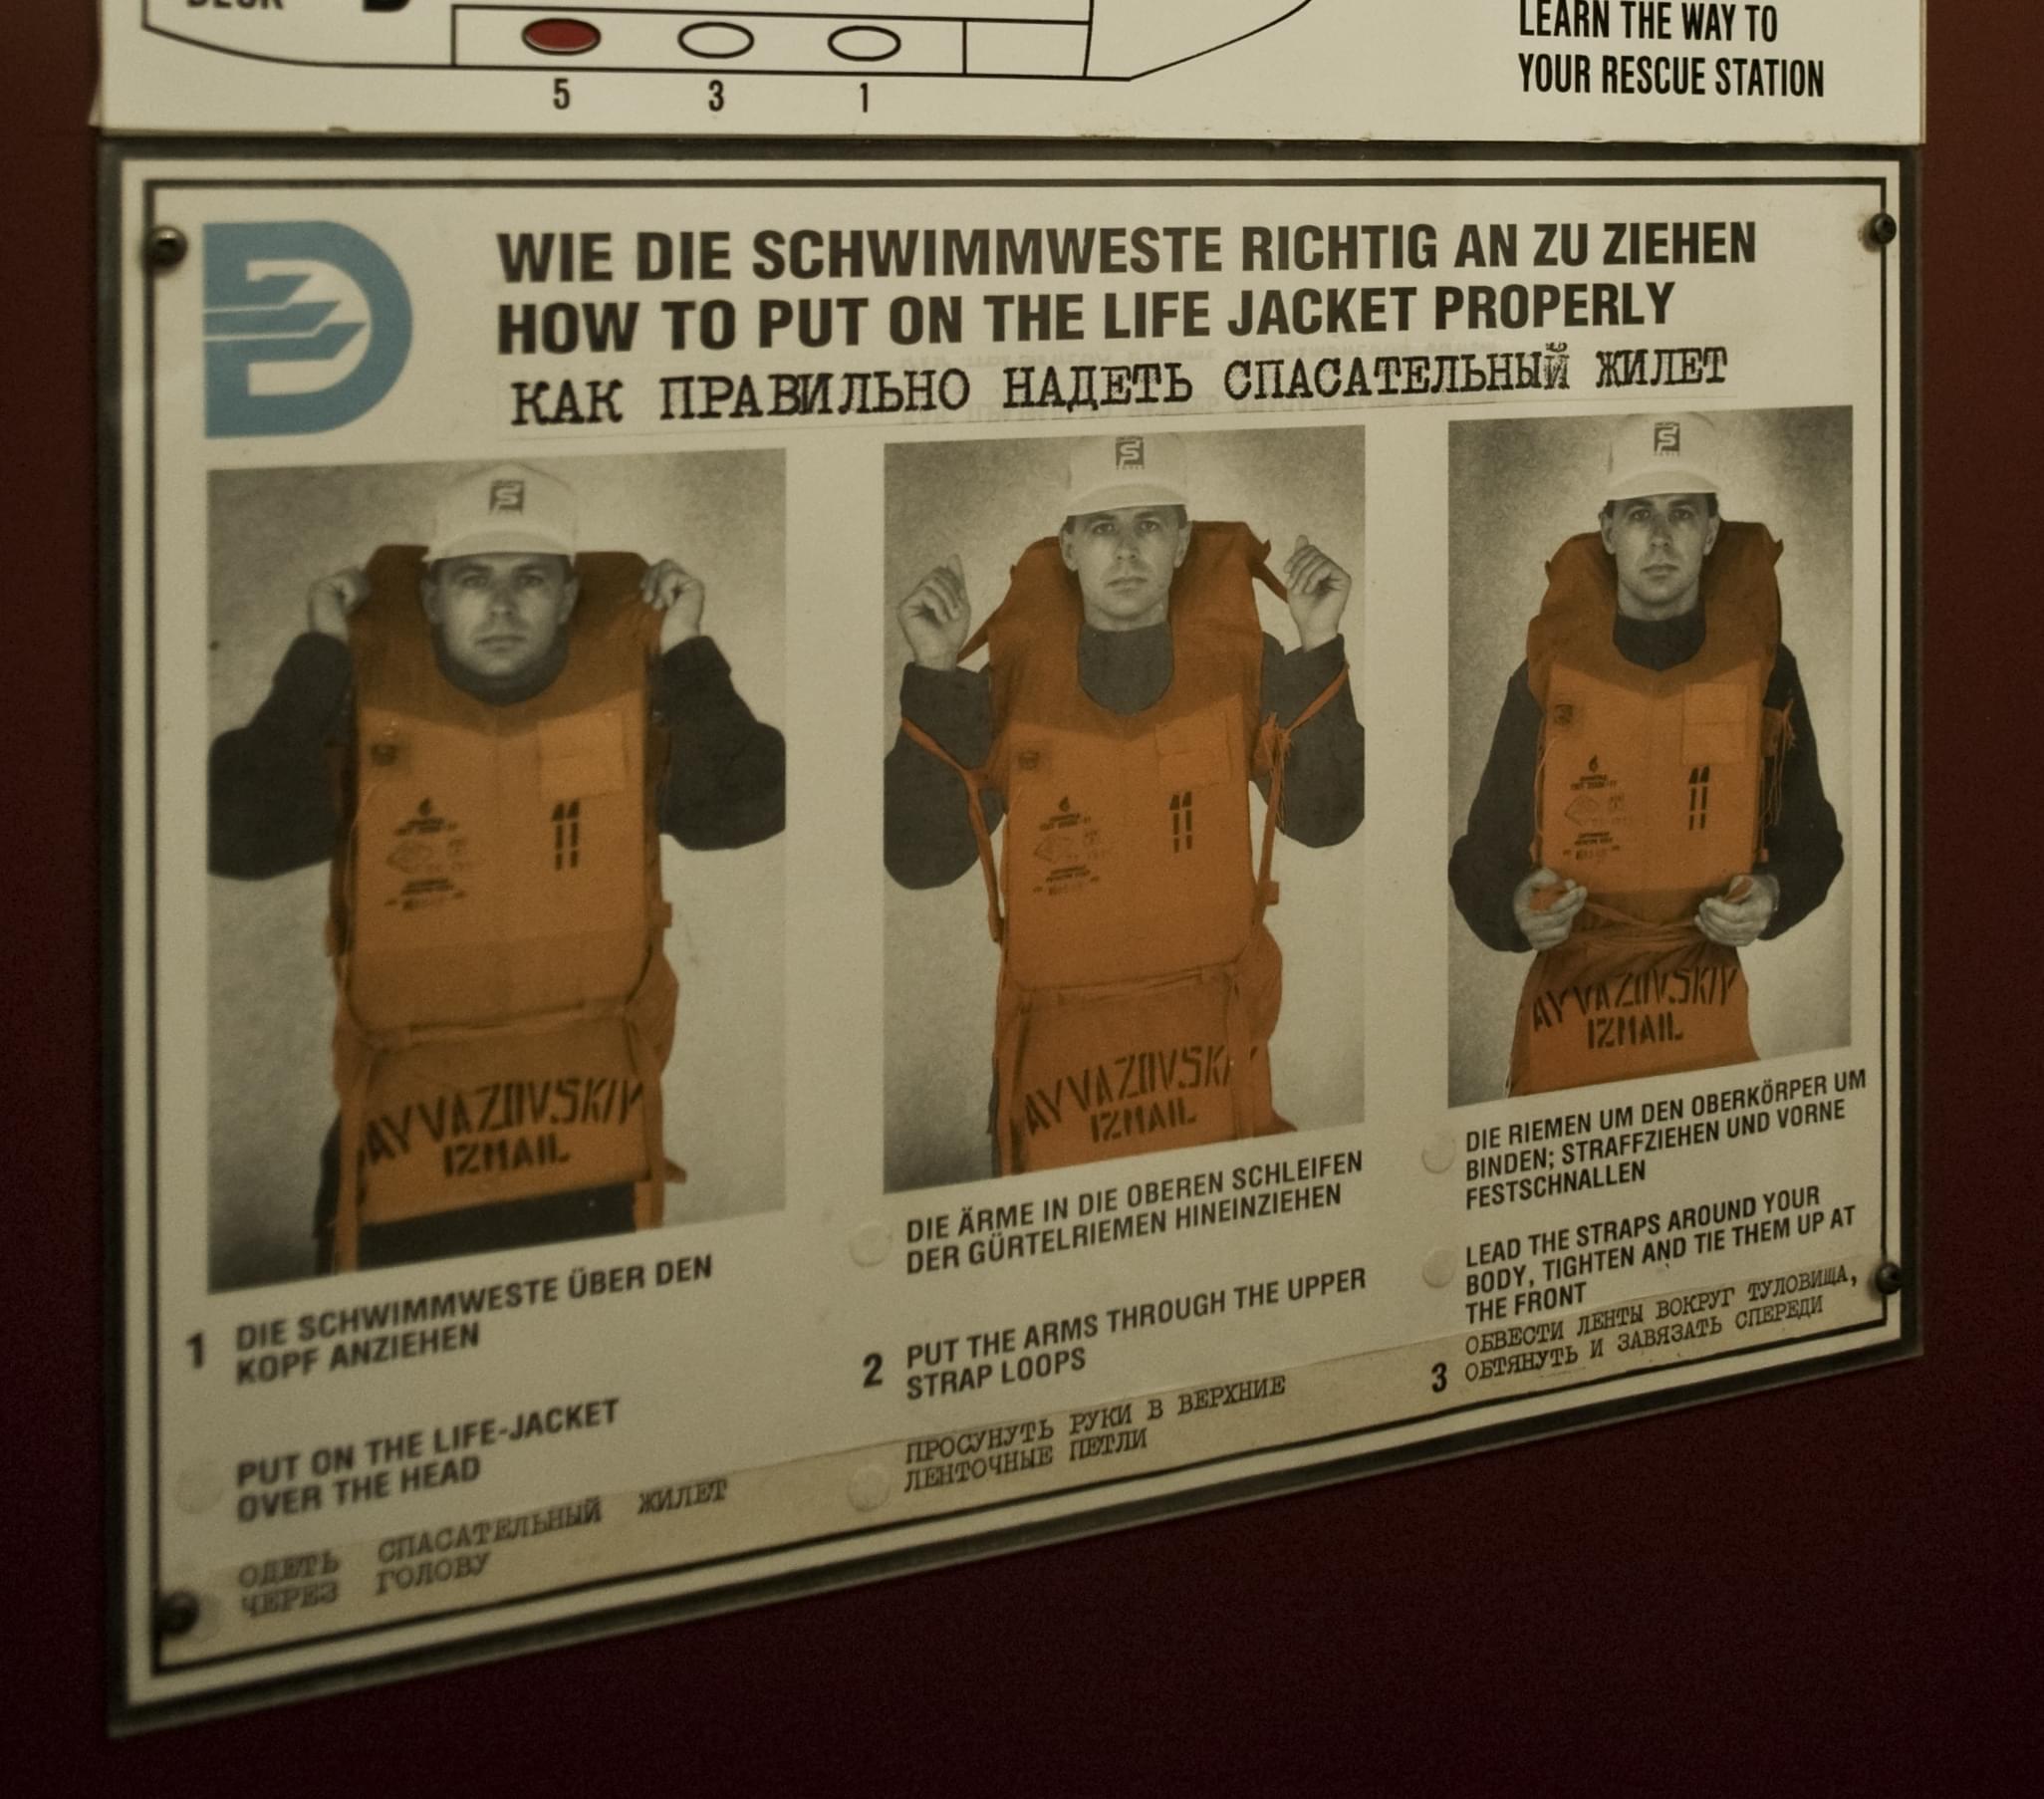 Instructions on how to put on a lifevest with photos of an adult male putting it on